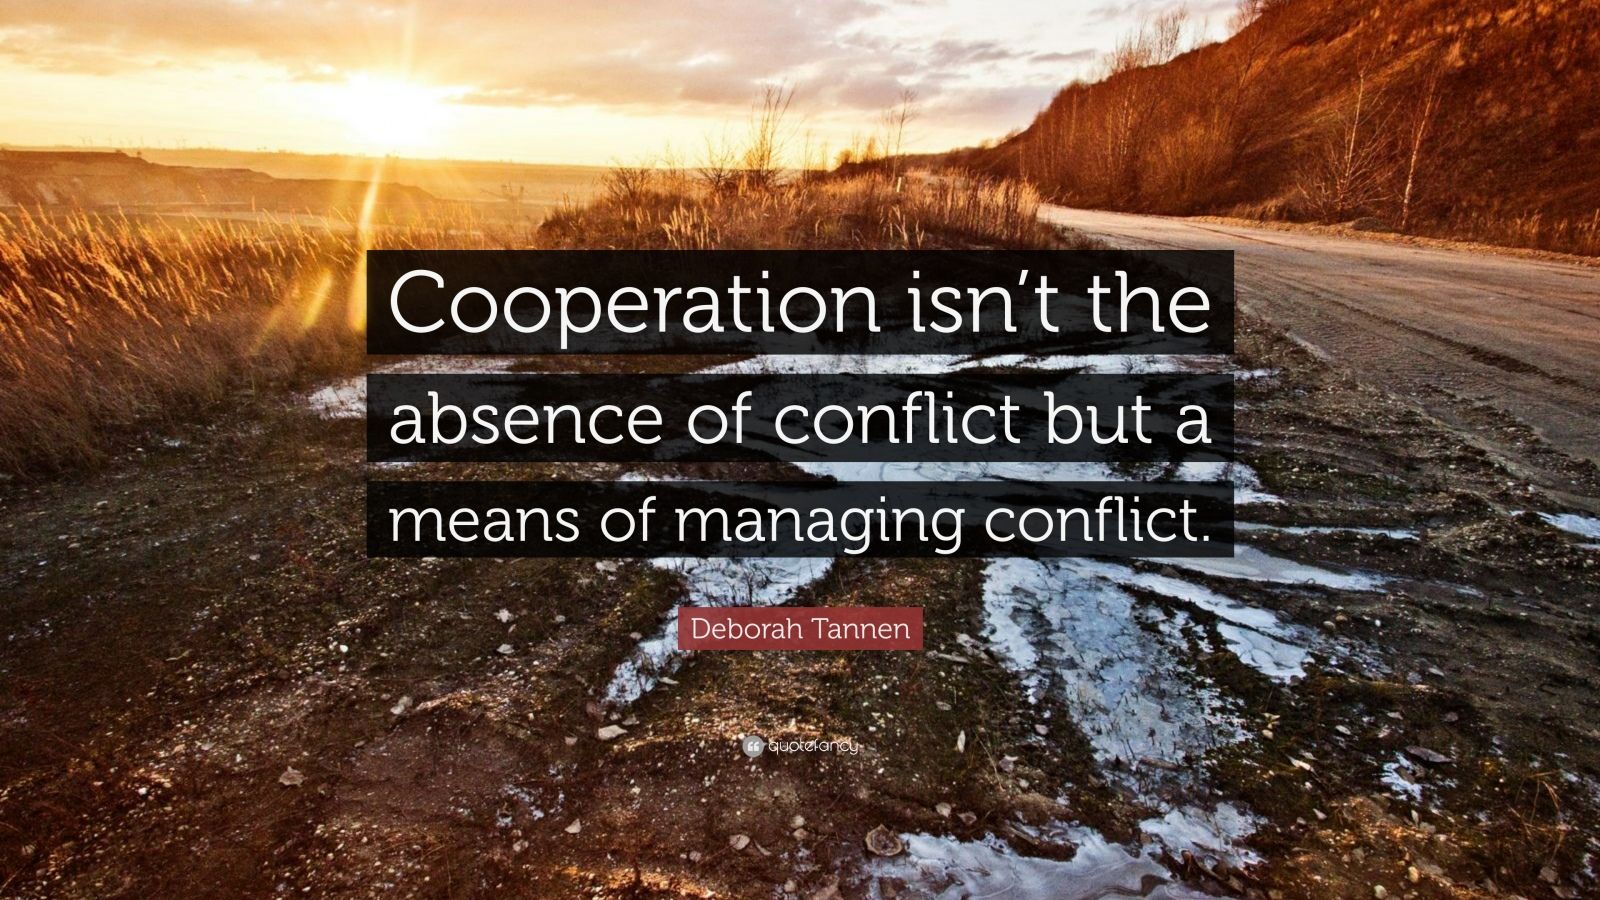 Deborah Tannen Quote: “Cooperation isn’t the absence of conflict but a